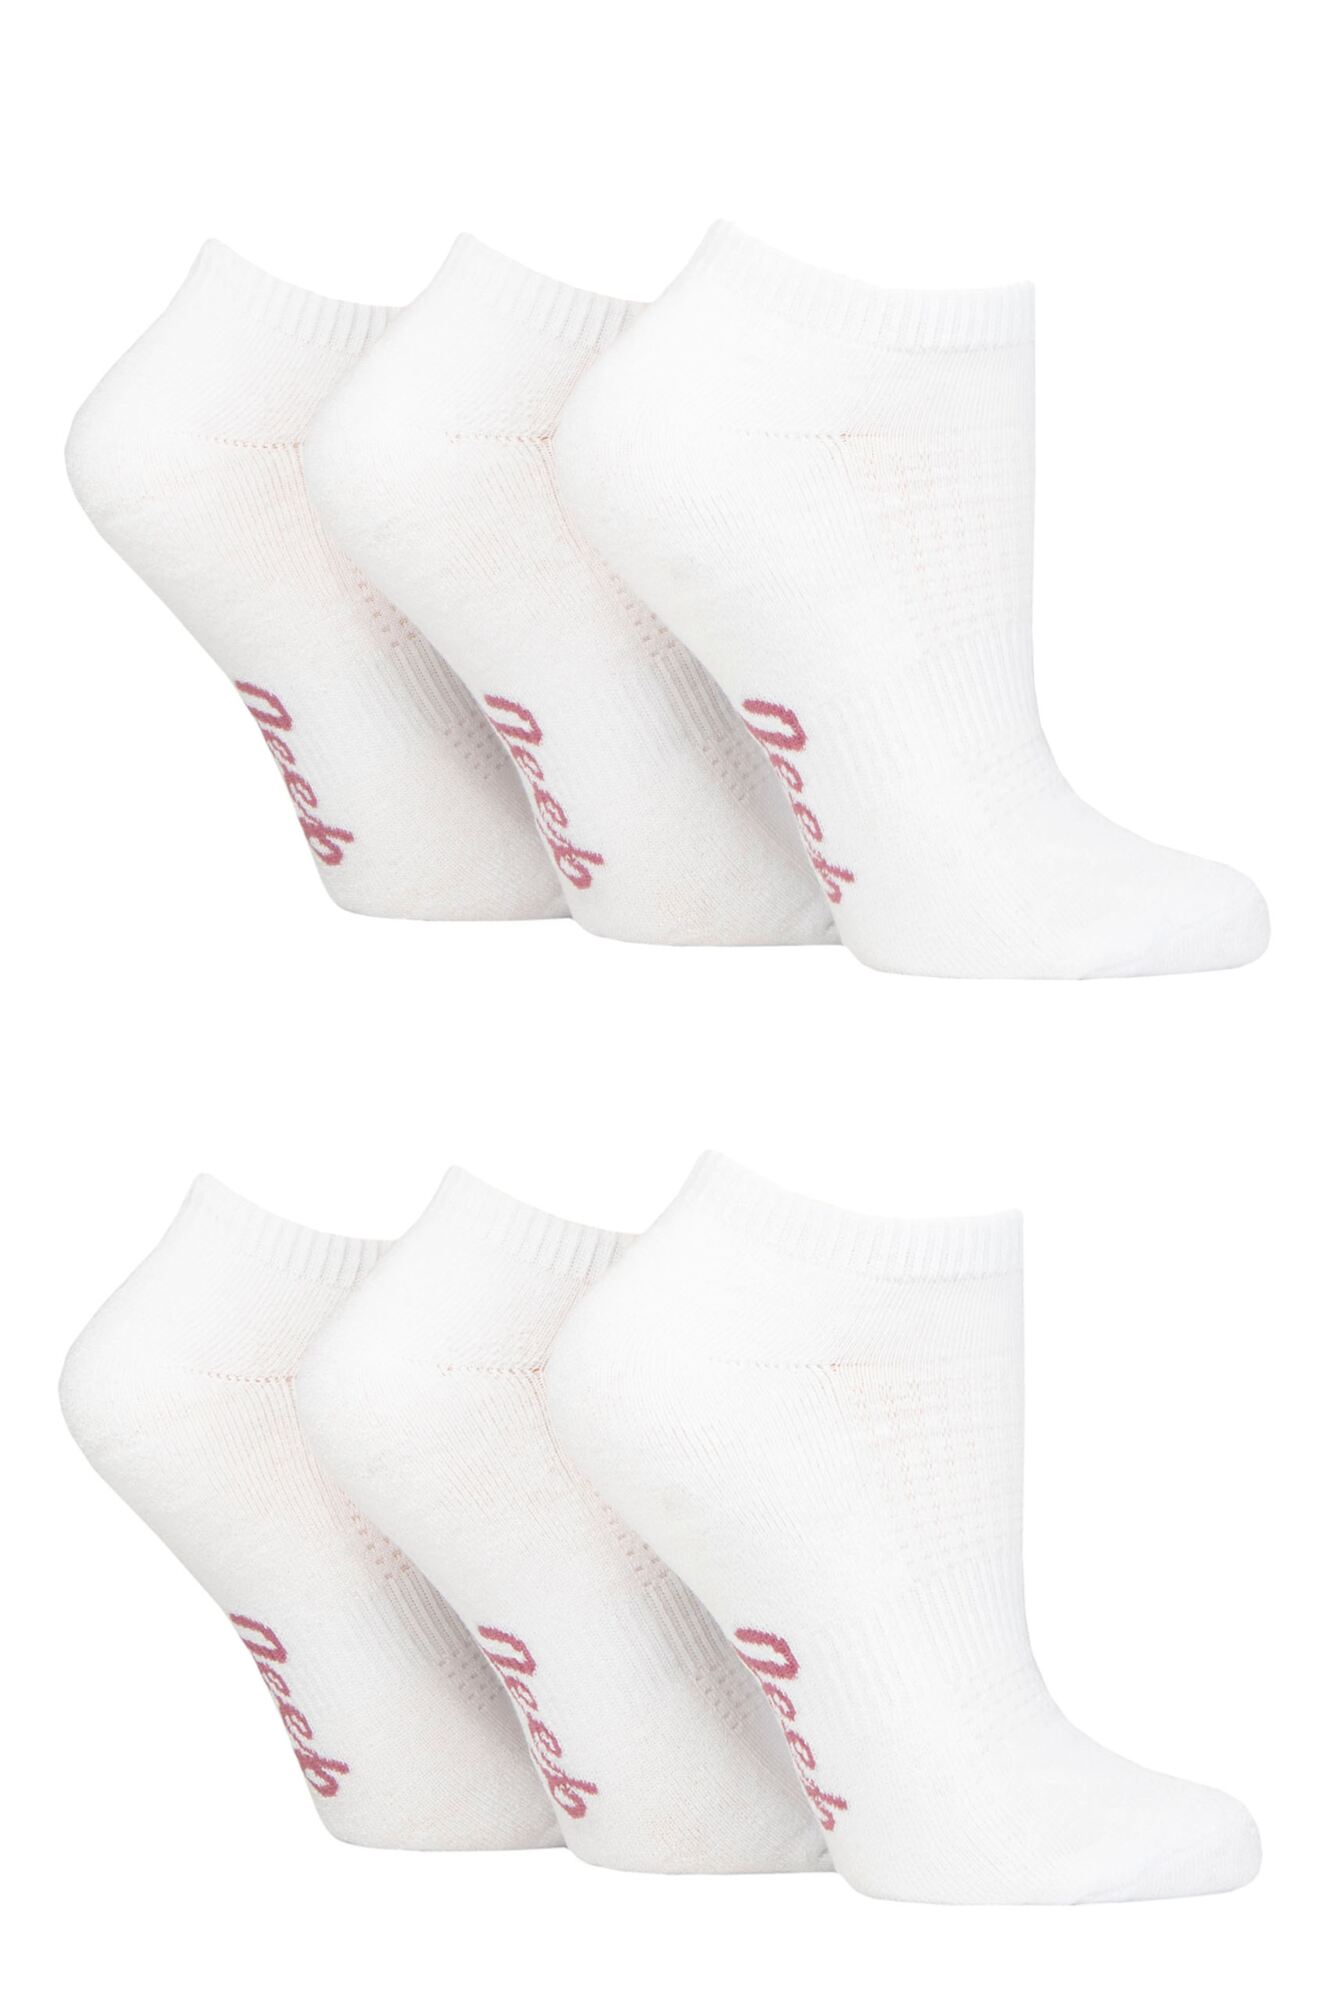 Ladies 6 Pair Jeep Performance Polyester Cushioned Trainer Socks